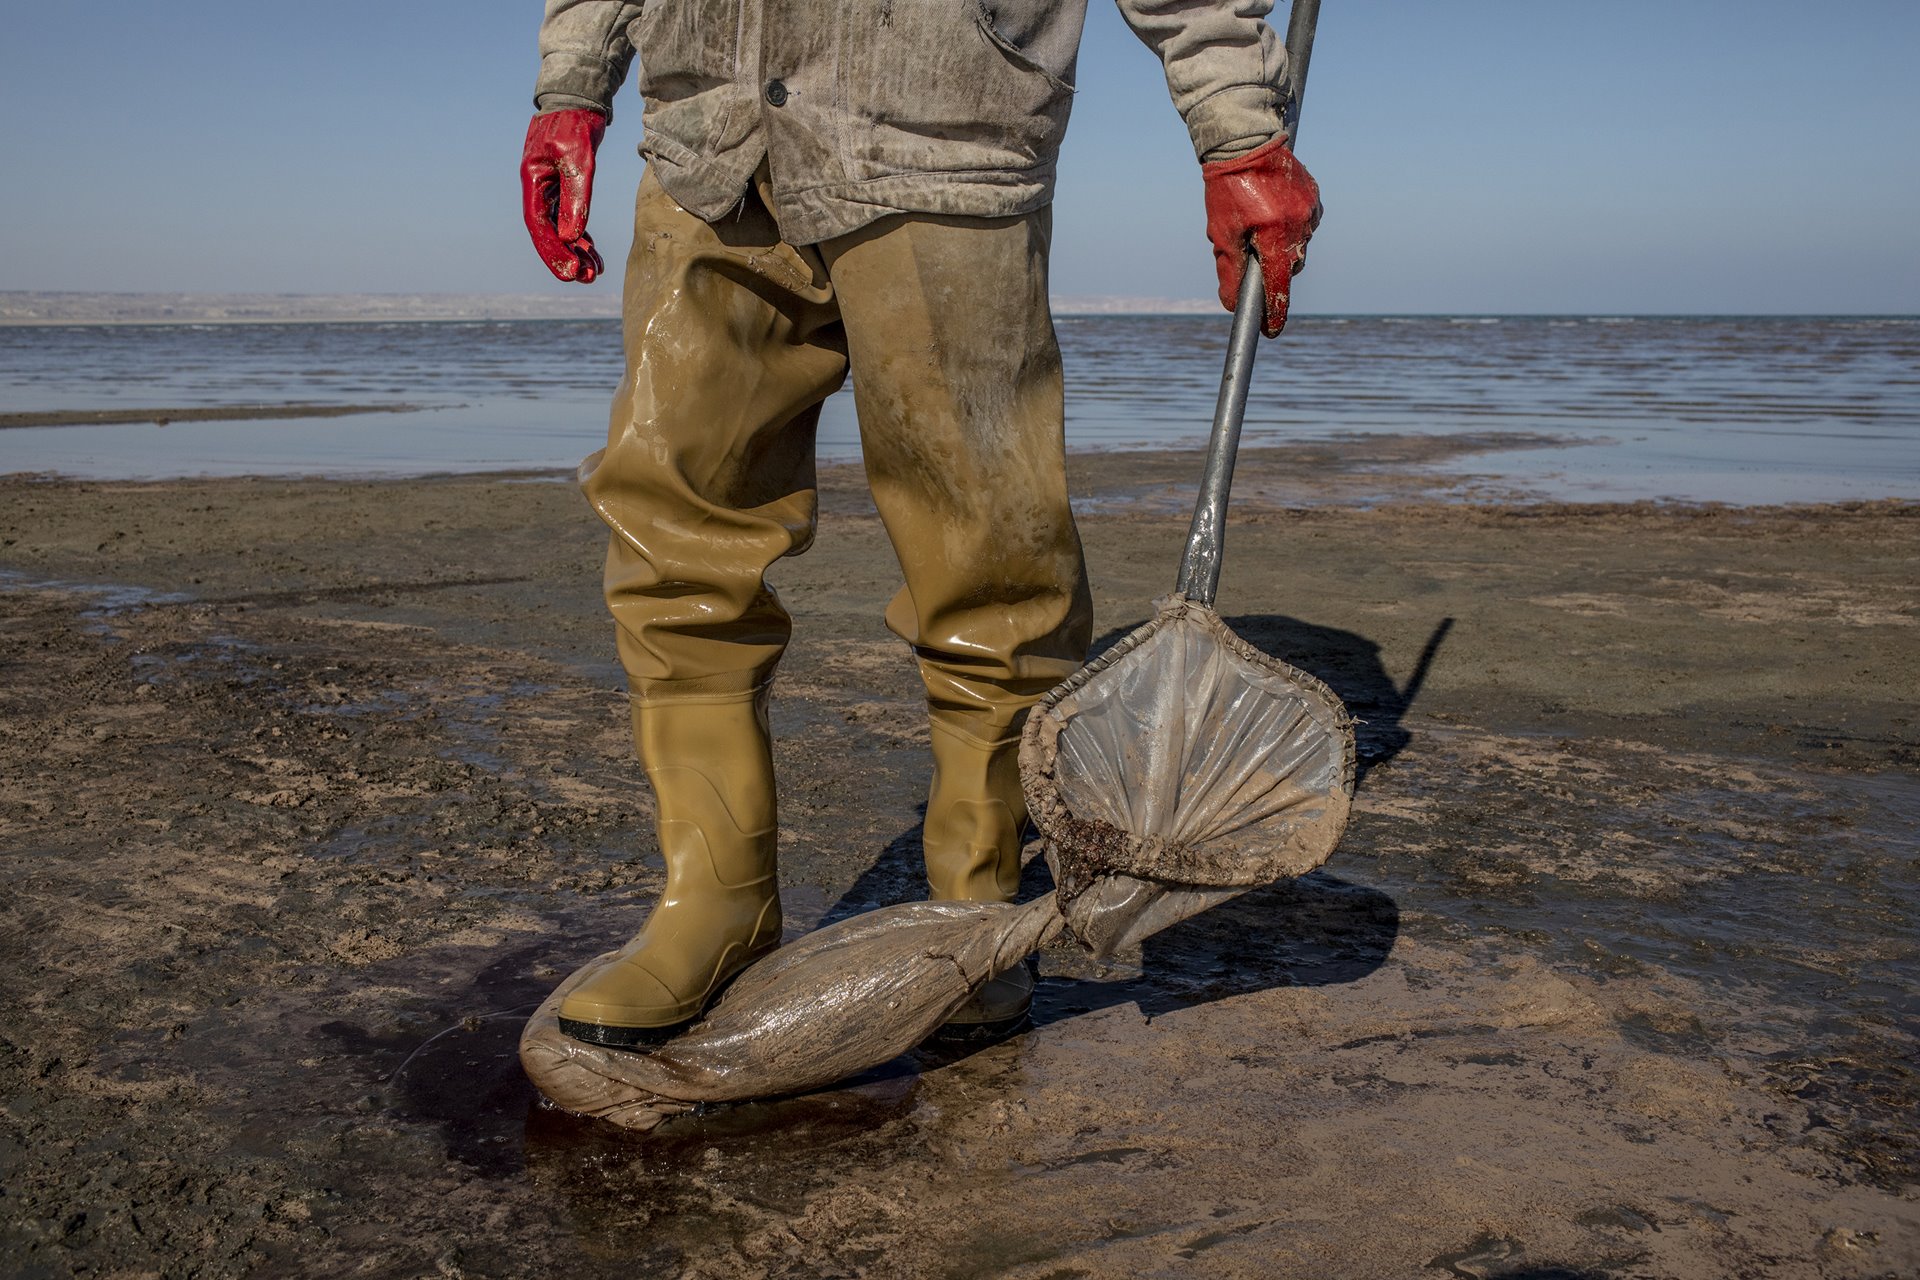 A shrimp farmer squeezes excess water out of a bag filled with minute <em>Artemia salina</em> brine shrimps, beside the Aral Sea, in Uzbekistan. Farming this ancient species of shrimp, which breed in highly saline water, is a growing industry along the shores of the Aral Sea. As its waters have receded, they have become increasingly saline.&nbsp;